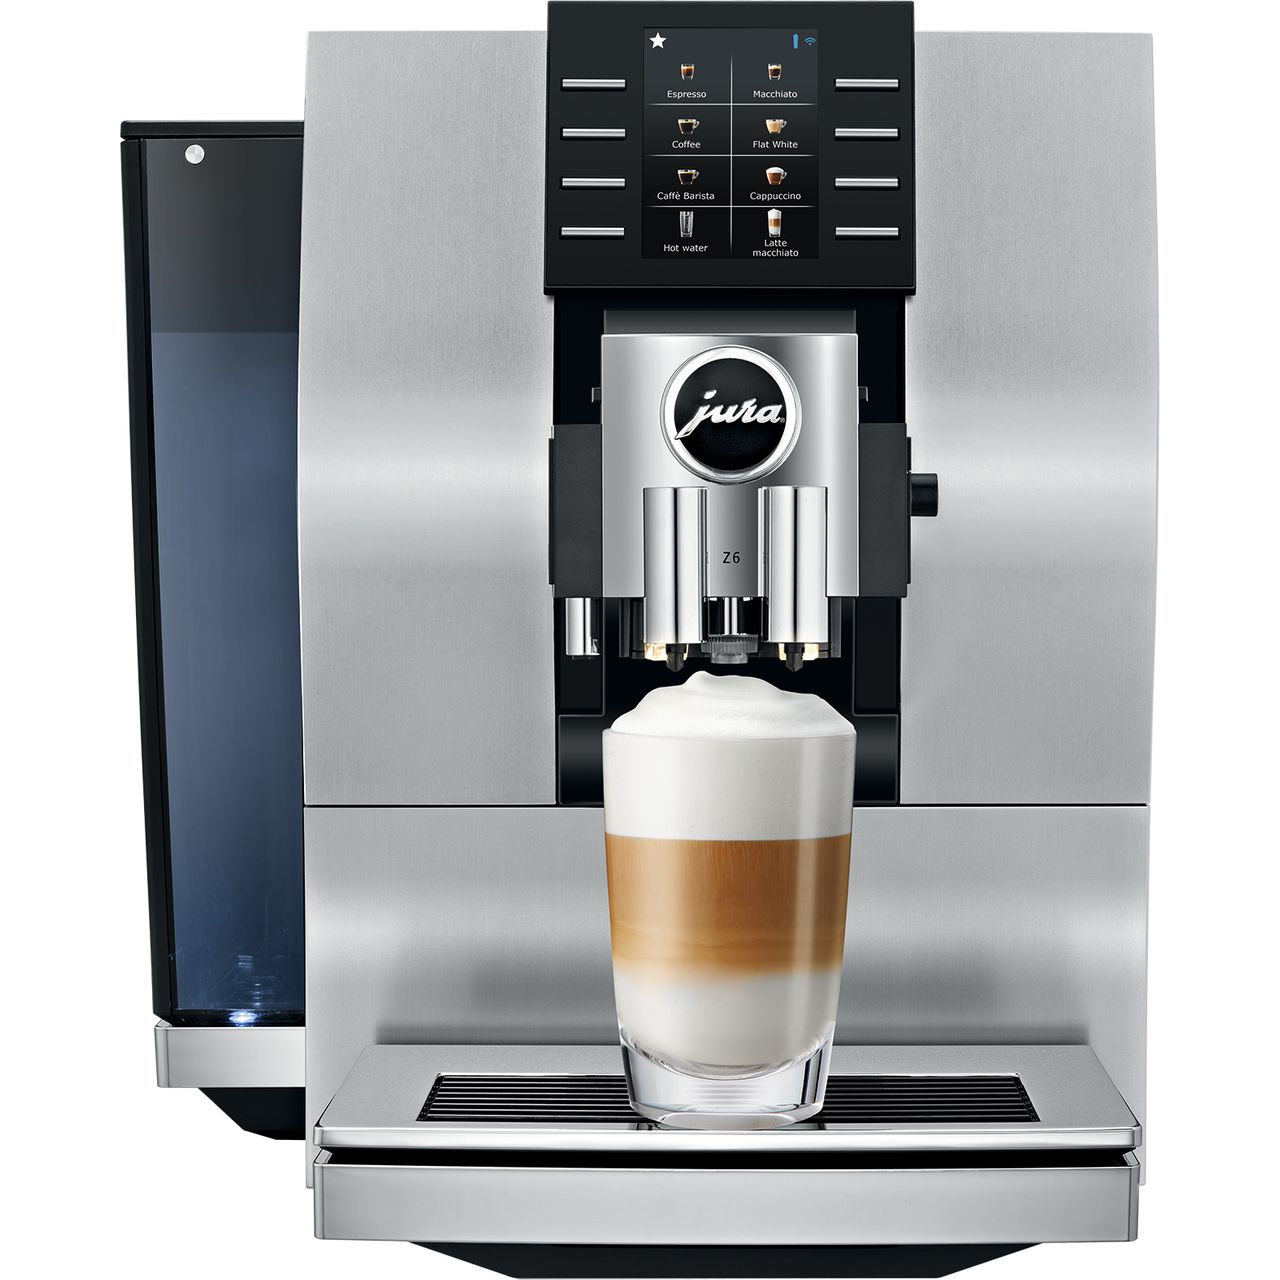 Jura Z6 15237 Bean to Cup Coffee Machine Review